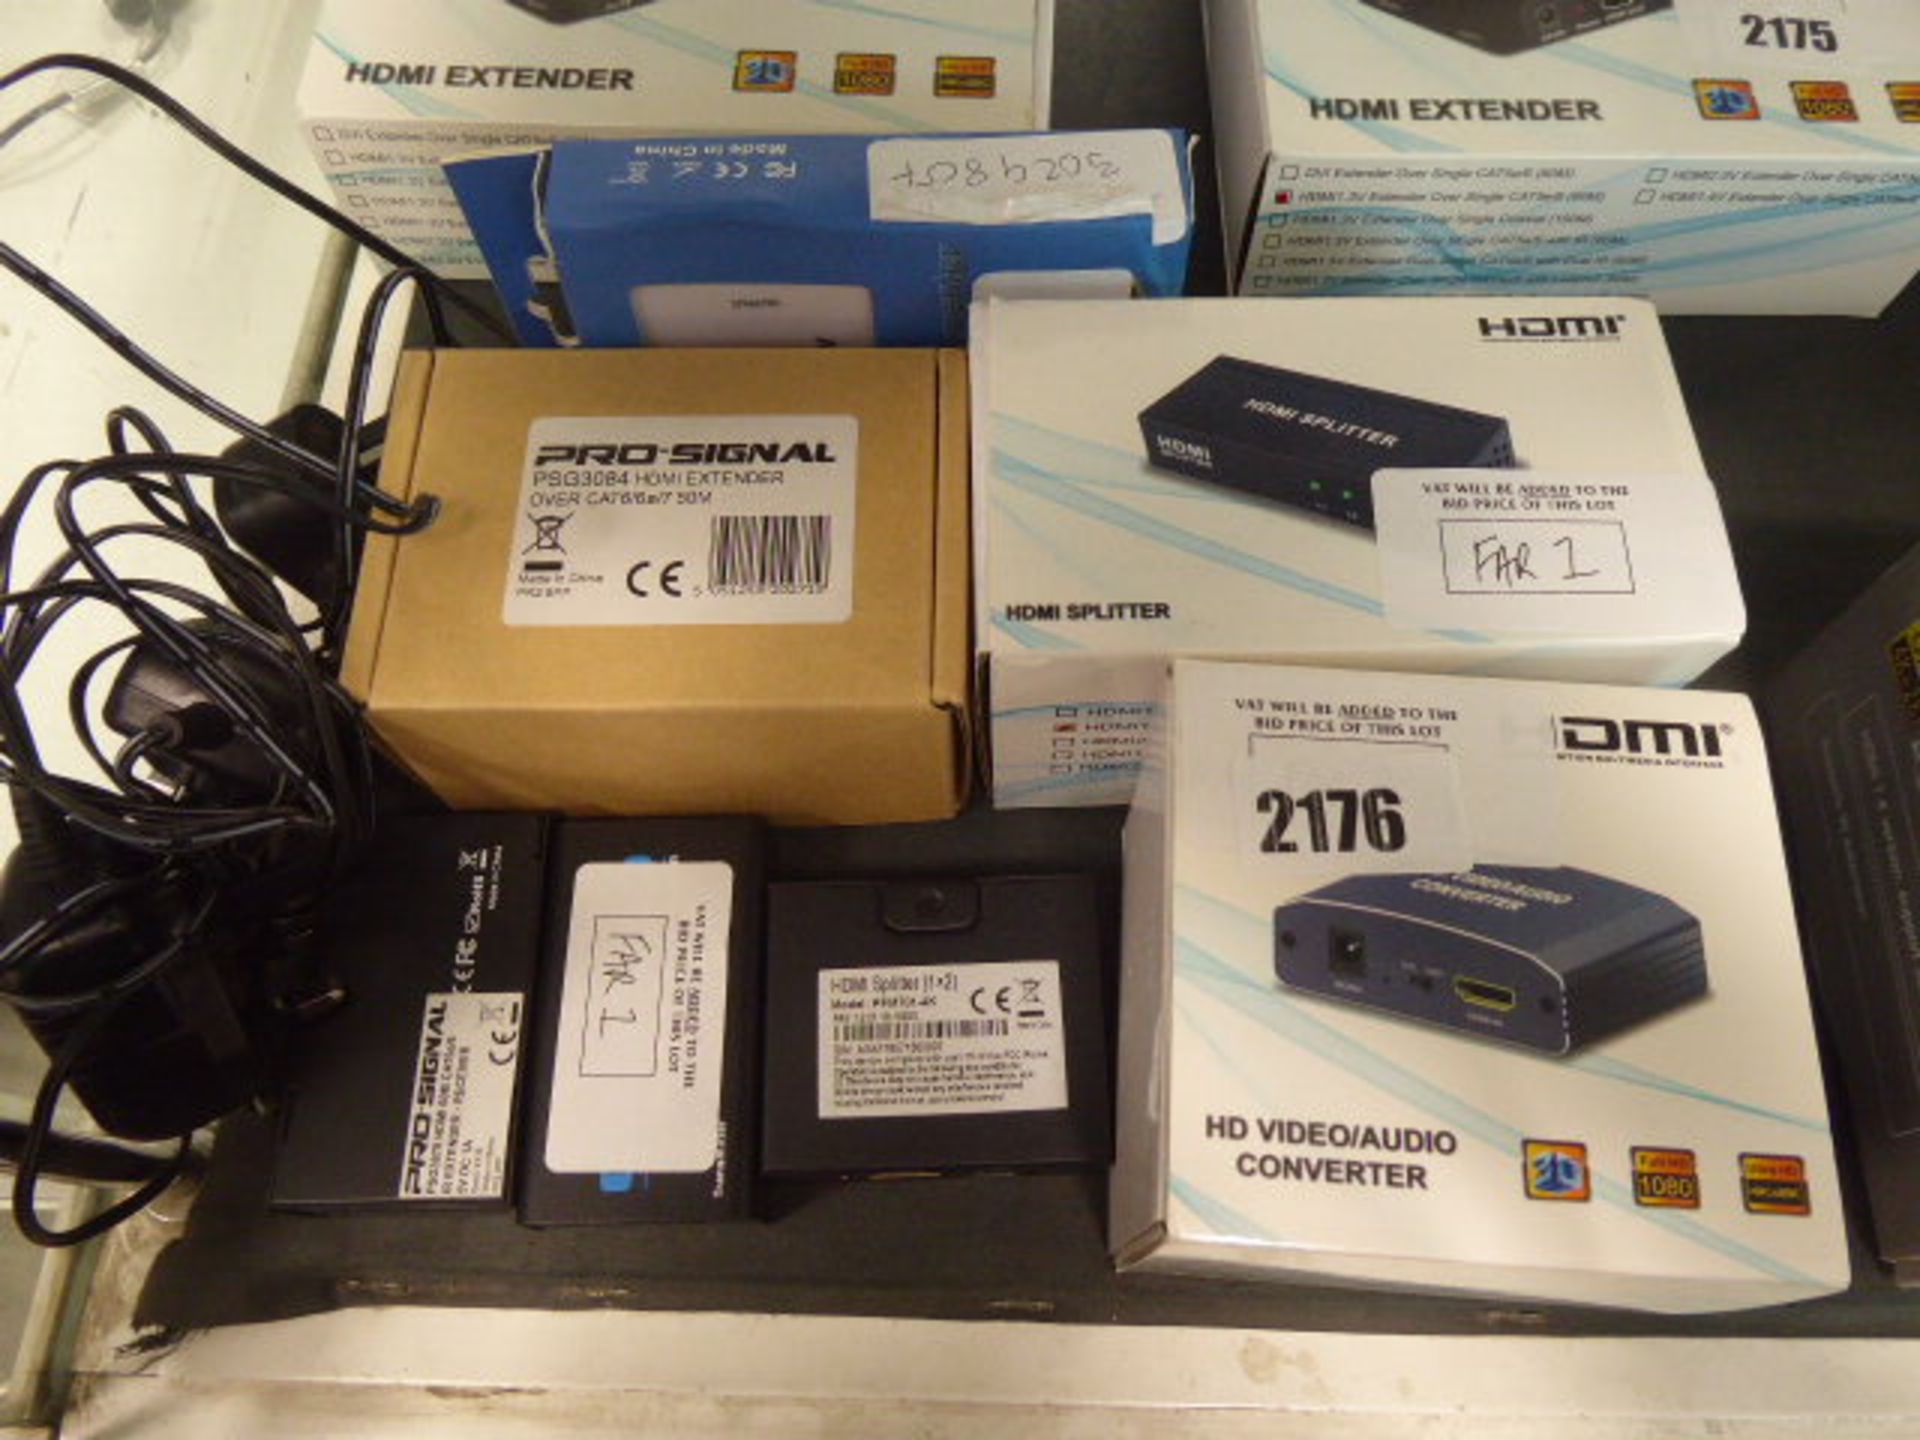 HDMI audio video converters, range extenders, mini HDMI splitter and other loose accessories